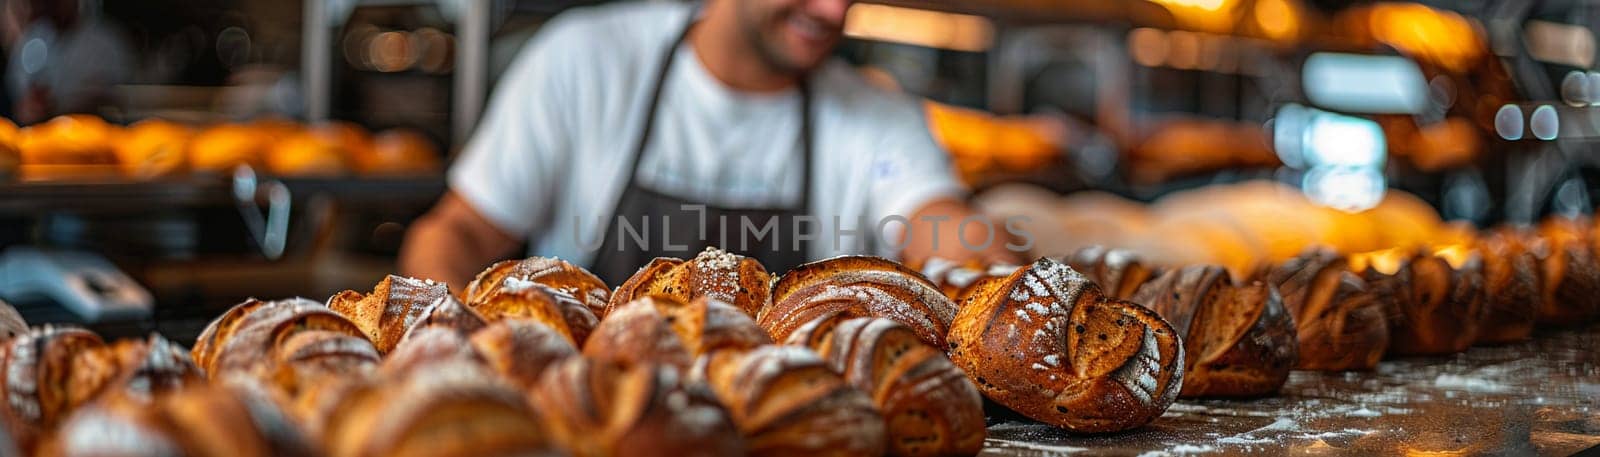 Artisan Baker Crafts Specialty Breads for Business Clients by Benzoix